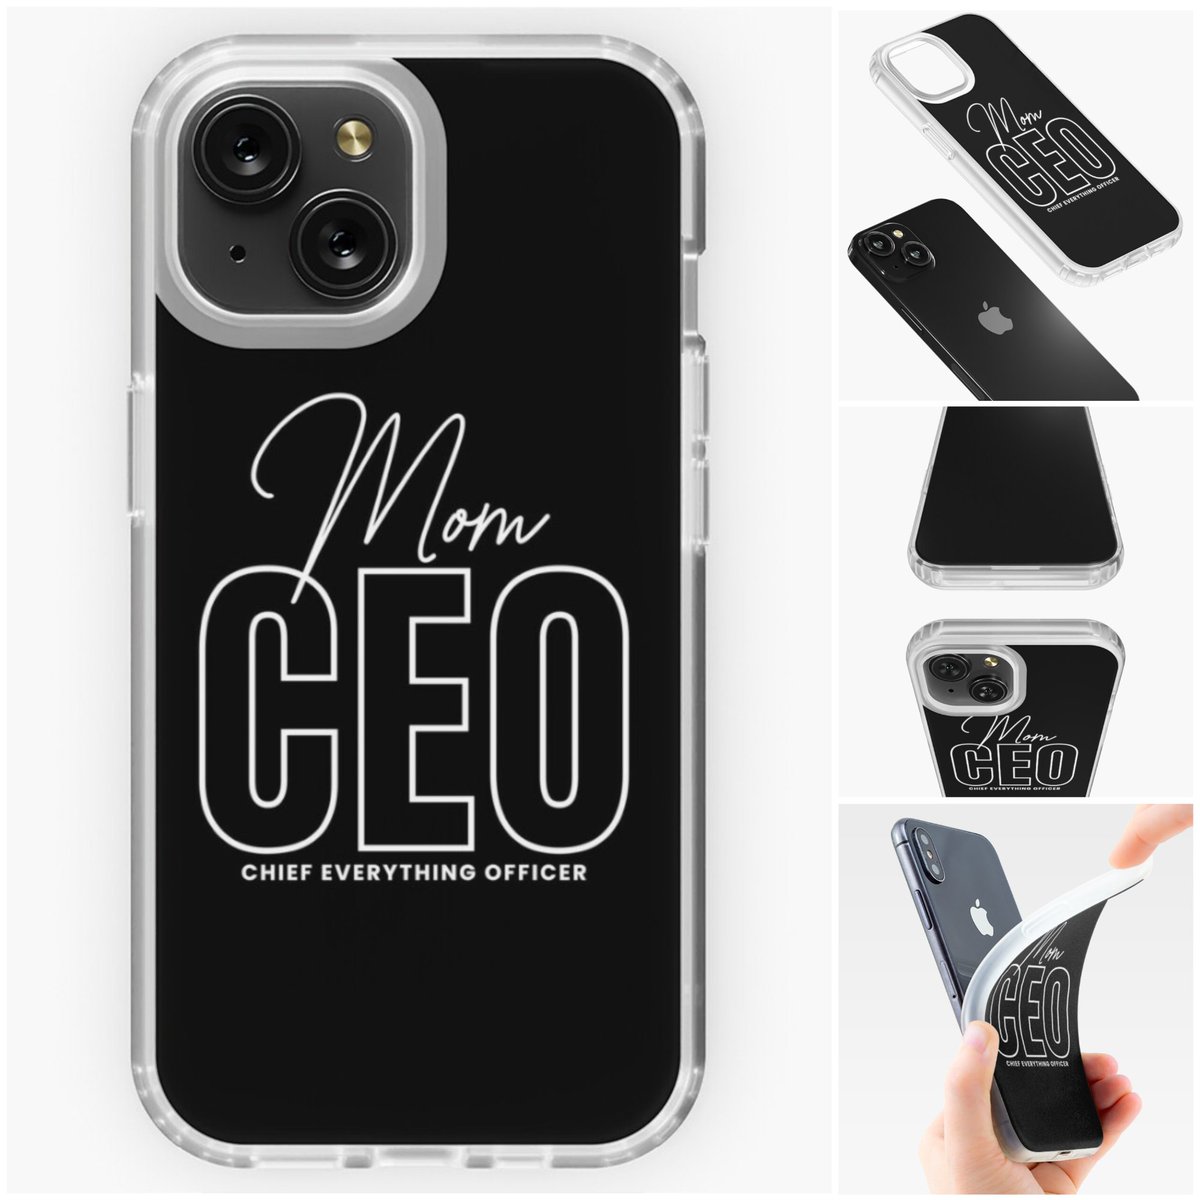 Mom CEO iPhone Case

redbubble.com/i/iphone-case/…

Collection: redbubble.com/shop/ap/160425…

#redbubble #redbubbleshop #art #prints #iphonecase #phonecase #mom #ceo #mothersdaygiftideas #mothersday #humor #fun #giftsformom #happymothersday #gifts #supermom